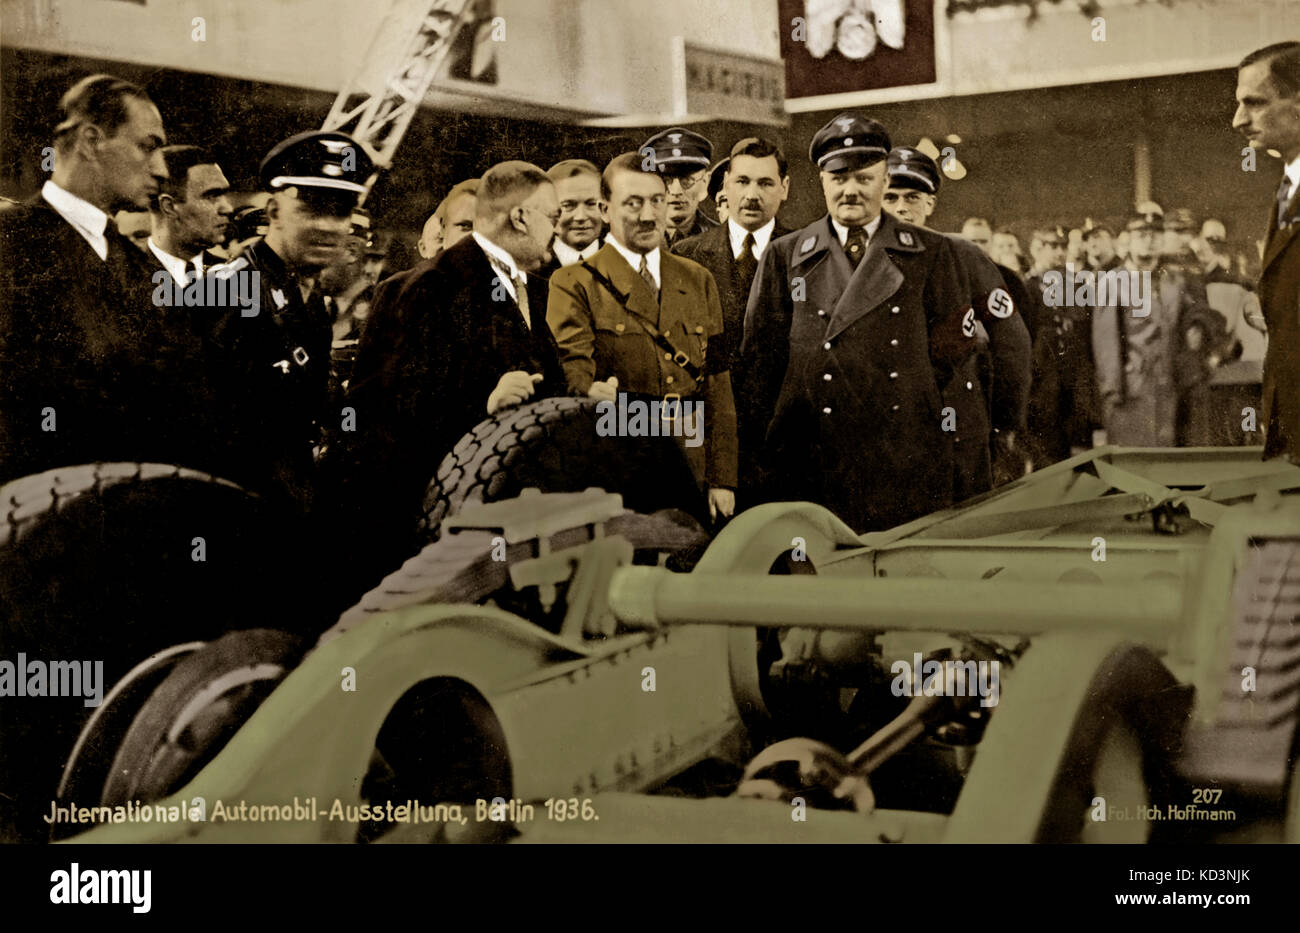 Adolf Hitler attending an International Exhibition of Automobiles in Berlin, 1936 Stock Photo